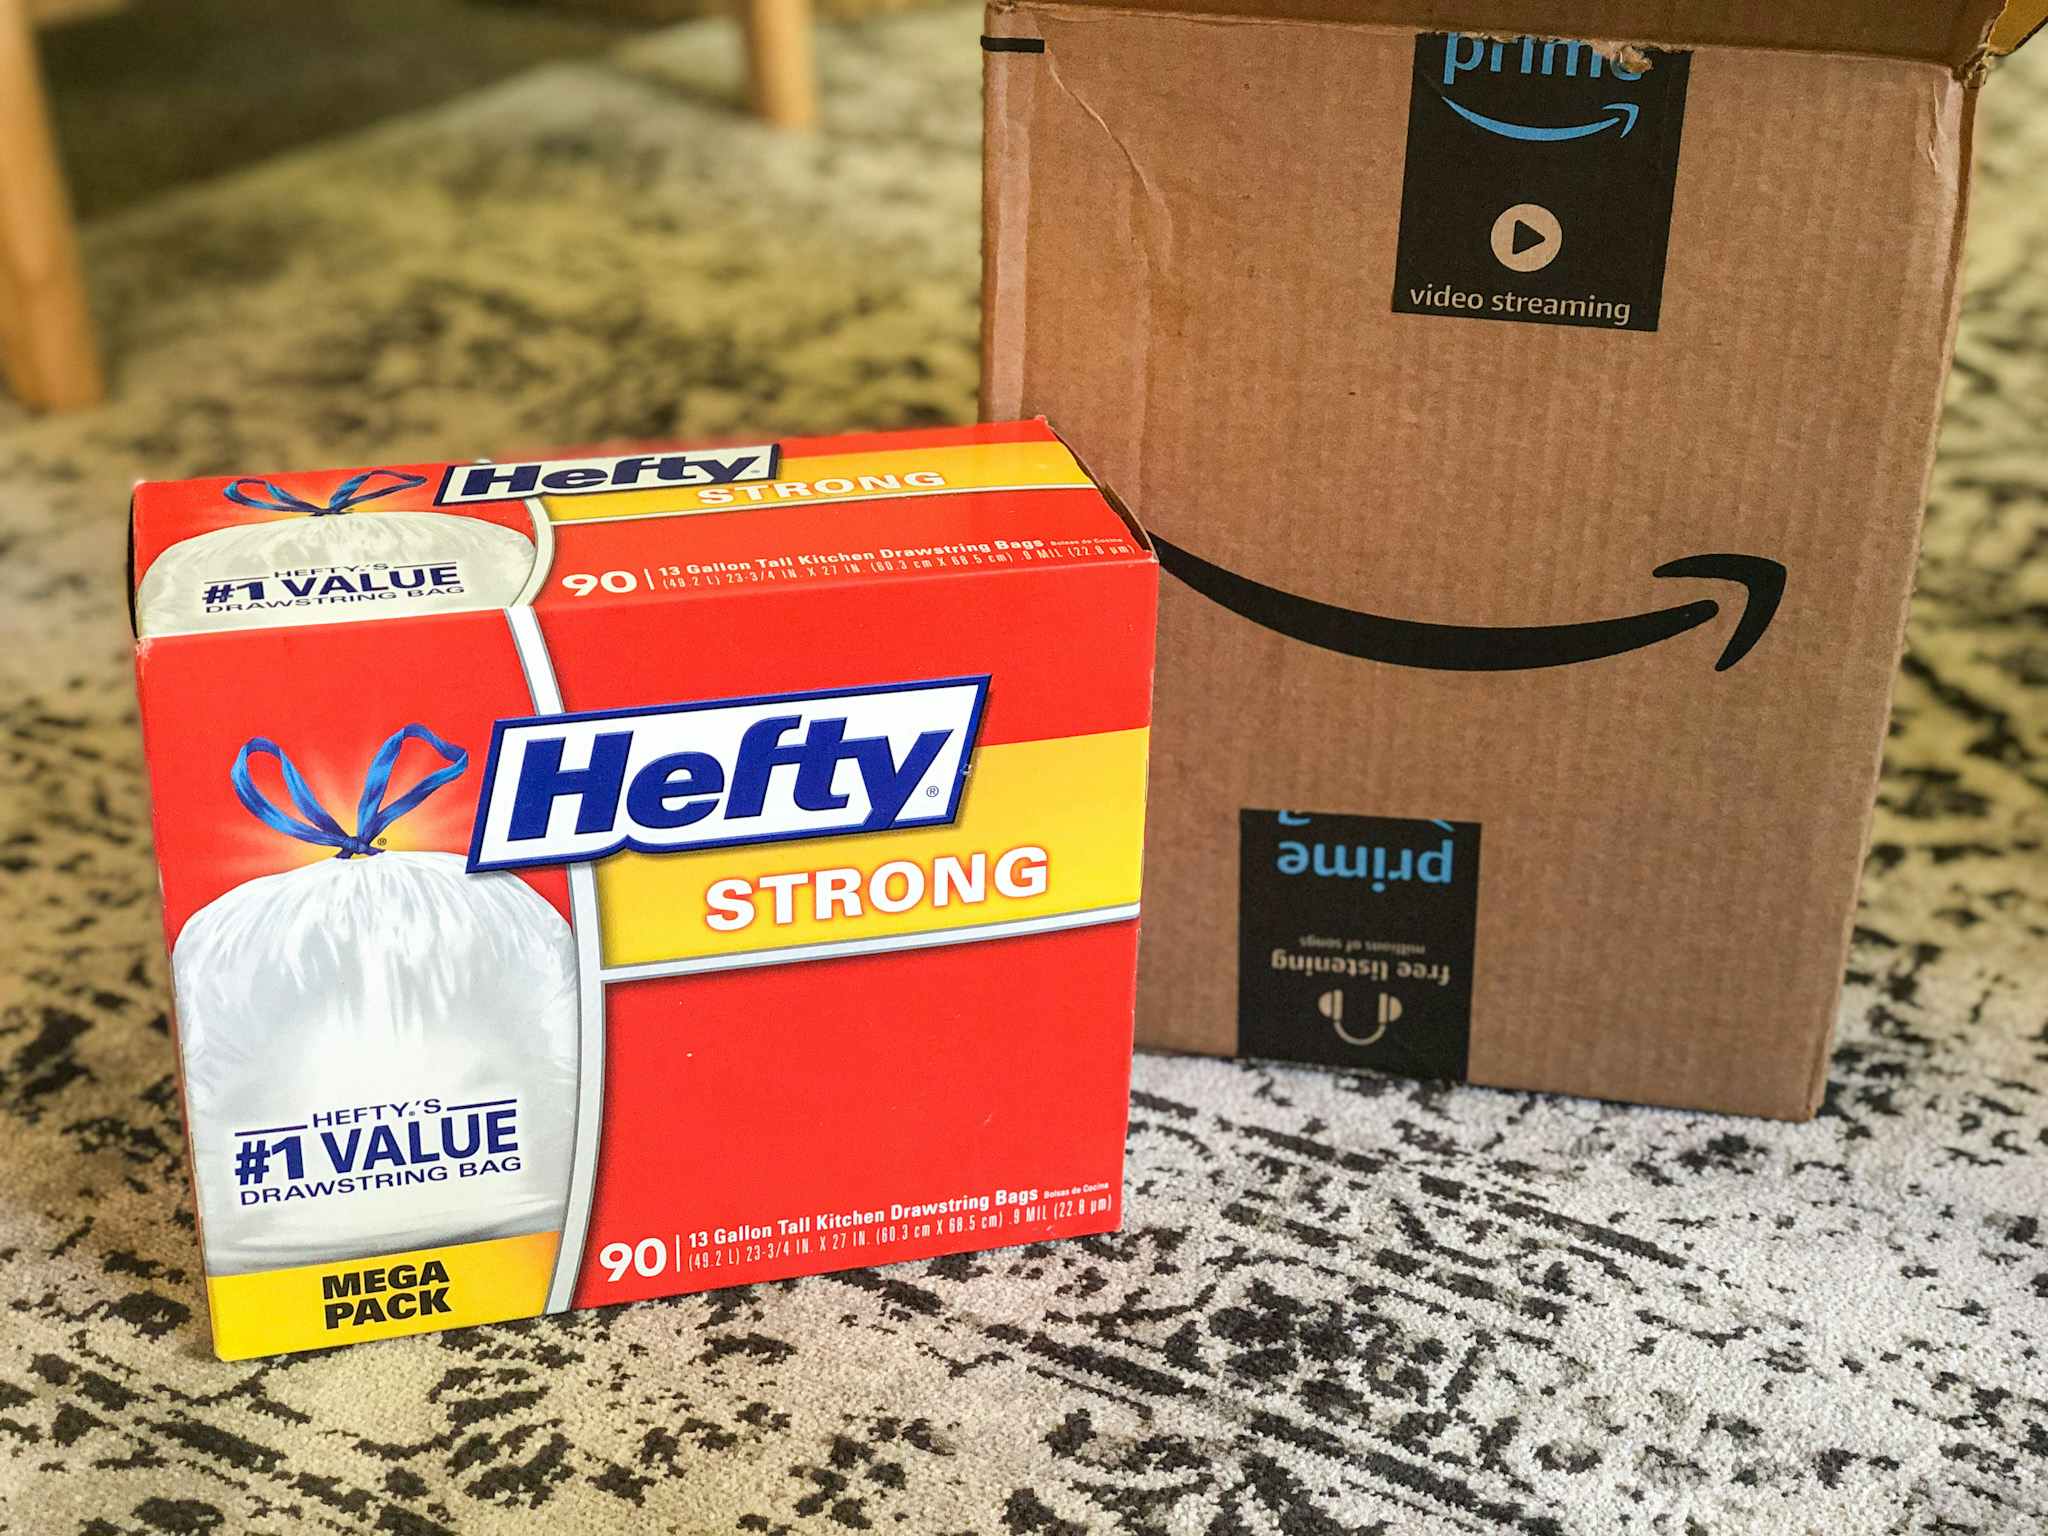 A box of Hefty trash bags next to an Amazon delivery box.